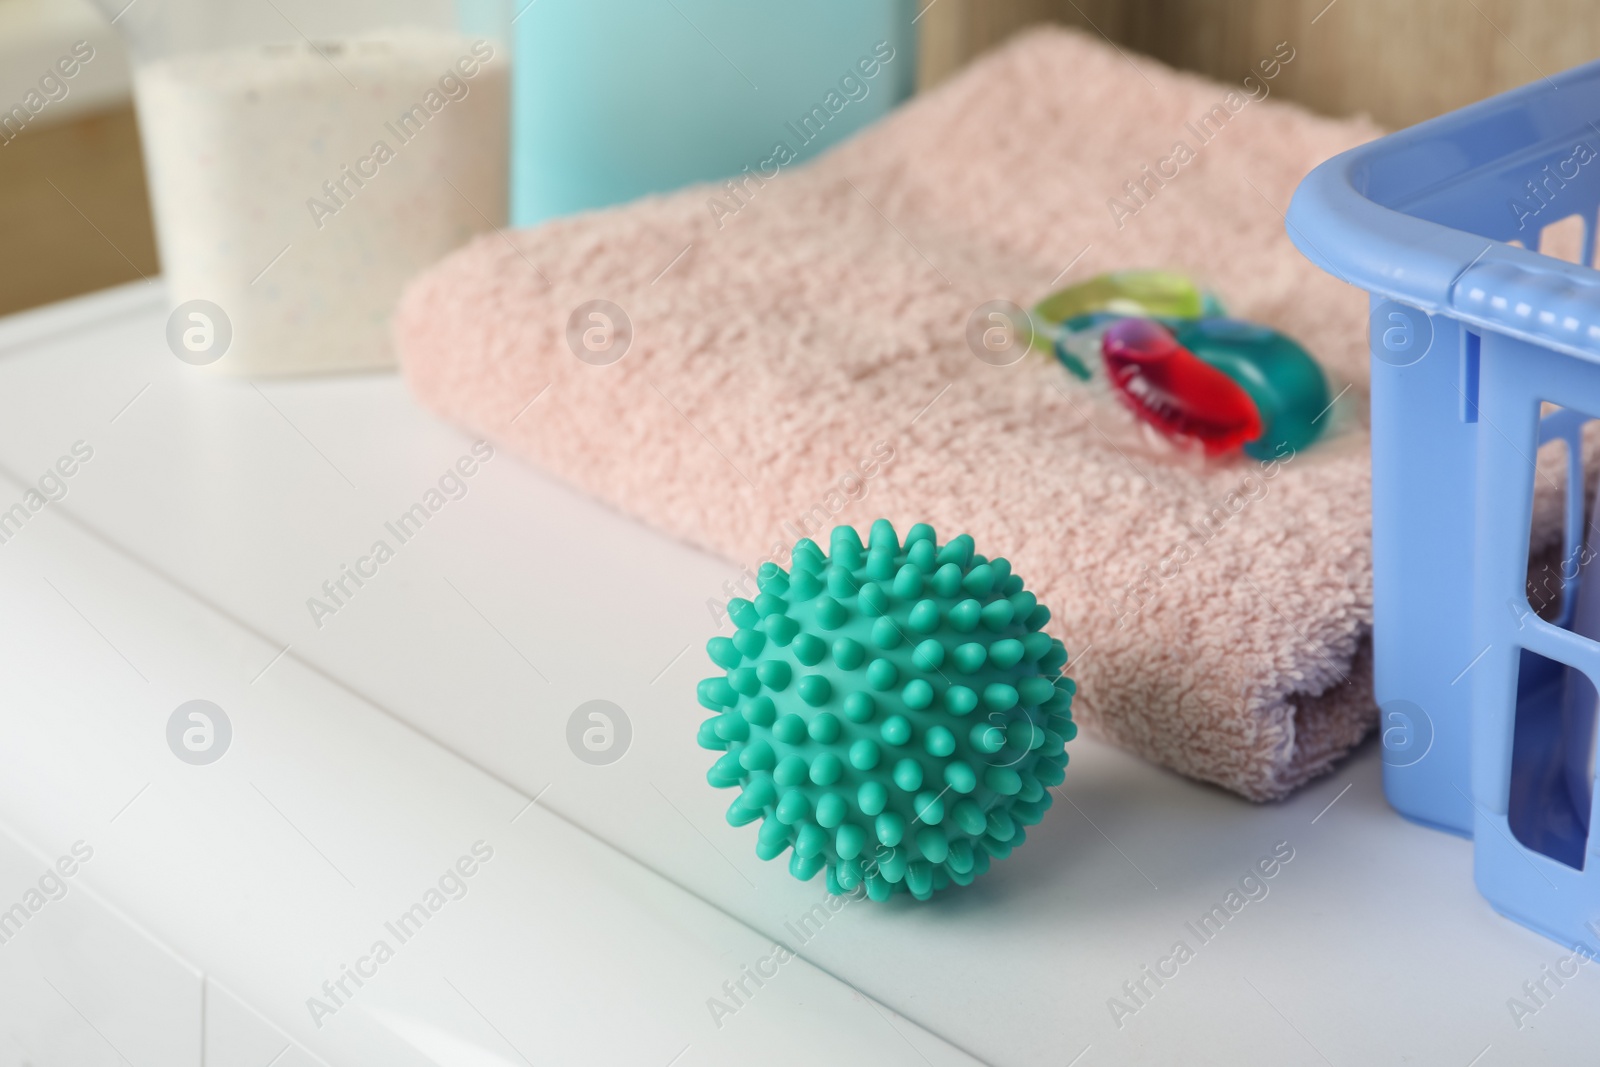 Photo of Turquoise dryer ball, detergents and towel on washing machine